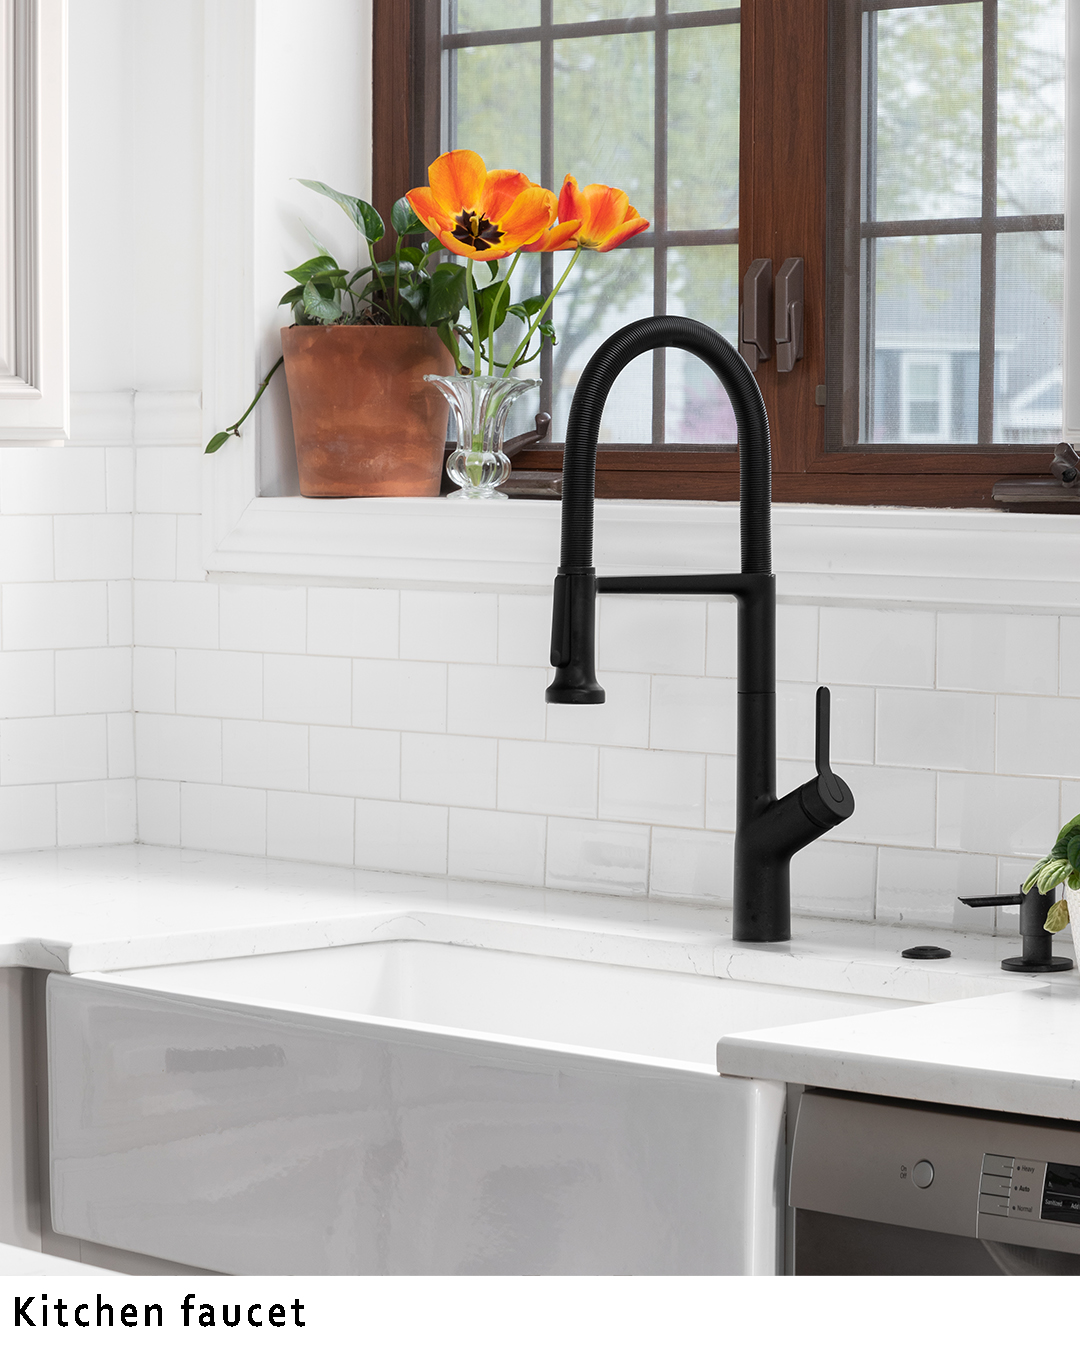 How to properly clean and maintain your kitchen faucet to ensure its longevity?